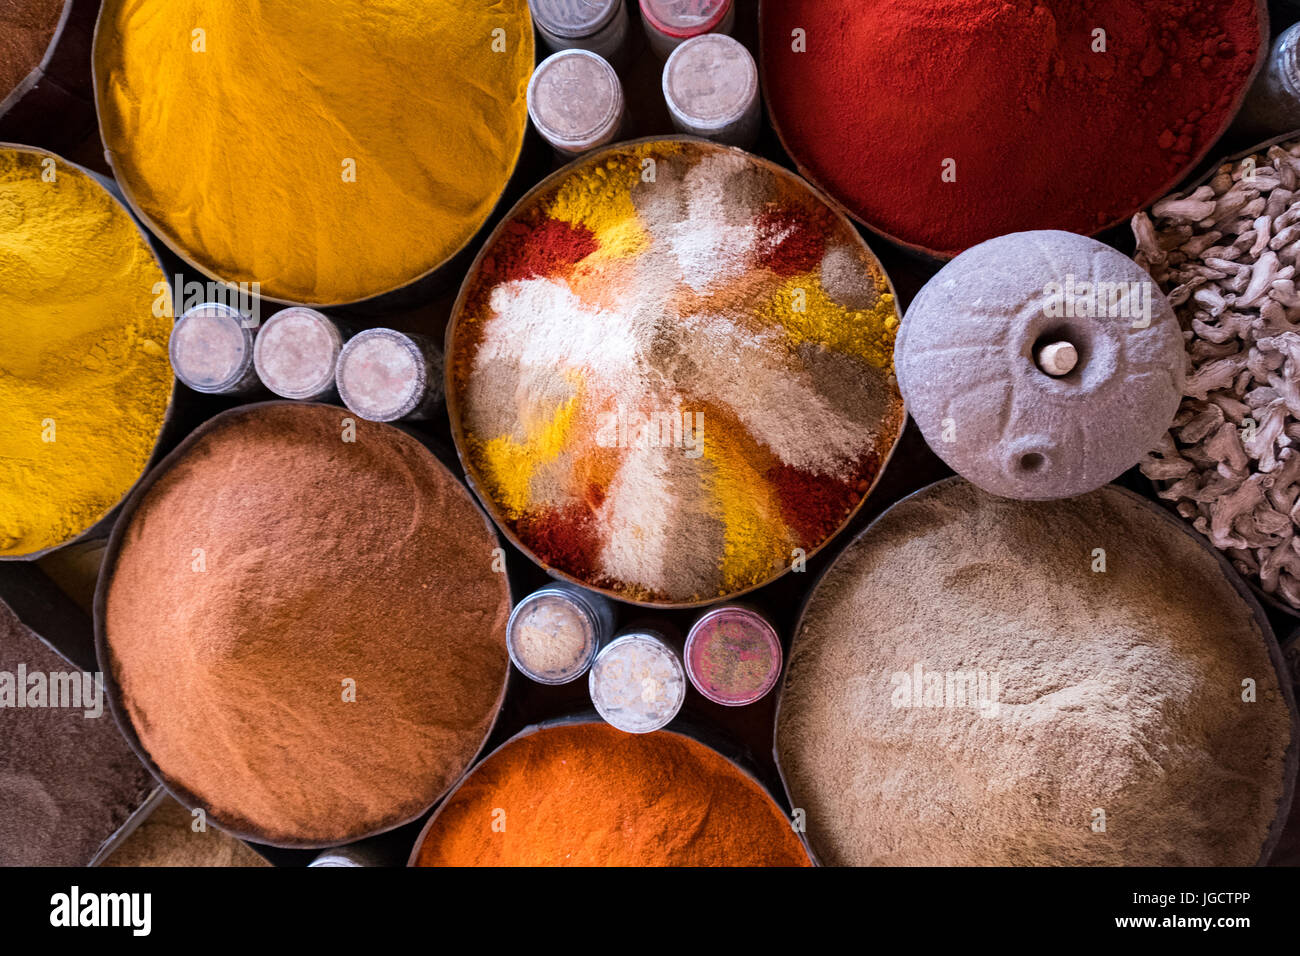 Overhead view of Spices at a market, Morocco Stock Photo